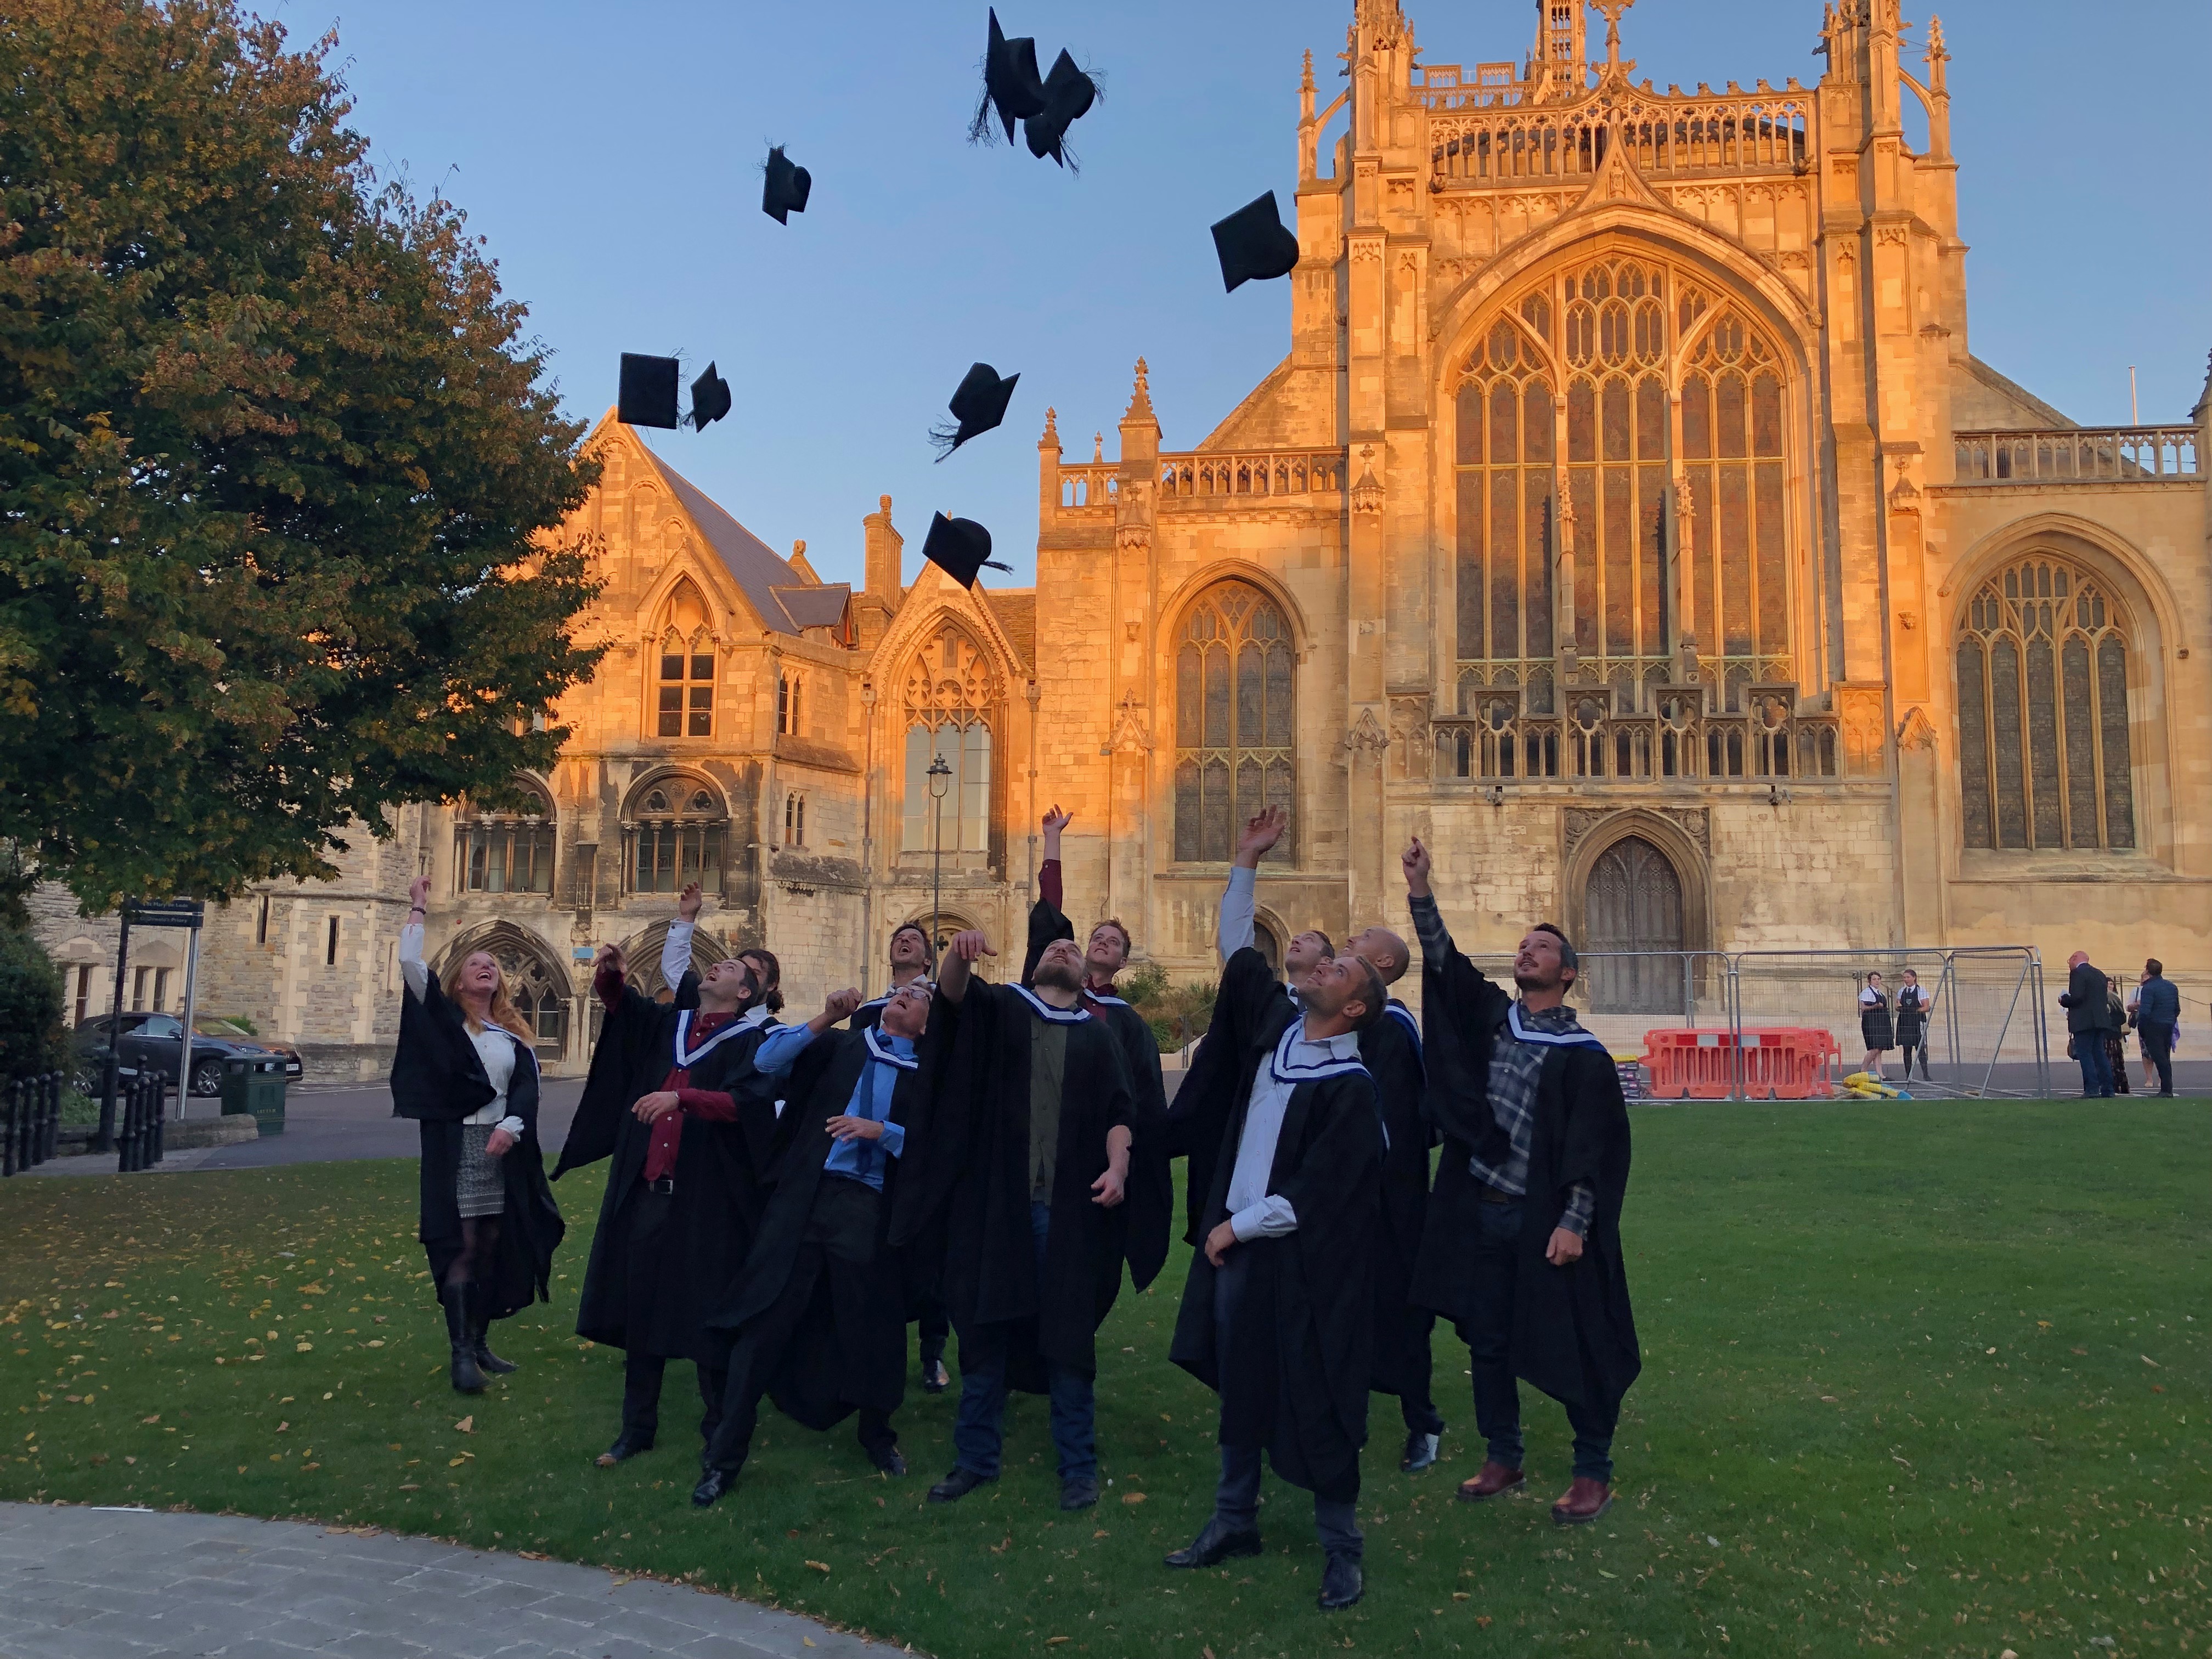 A group wearing graduation gowns throw their mortar boards in the air to celebrate. Behind them, light from the setting sun turns Gloucester Cathedral orange against a blue sky.